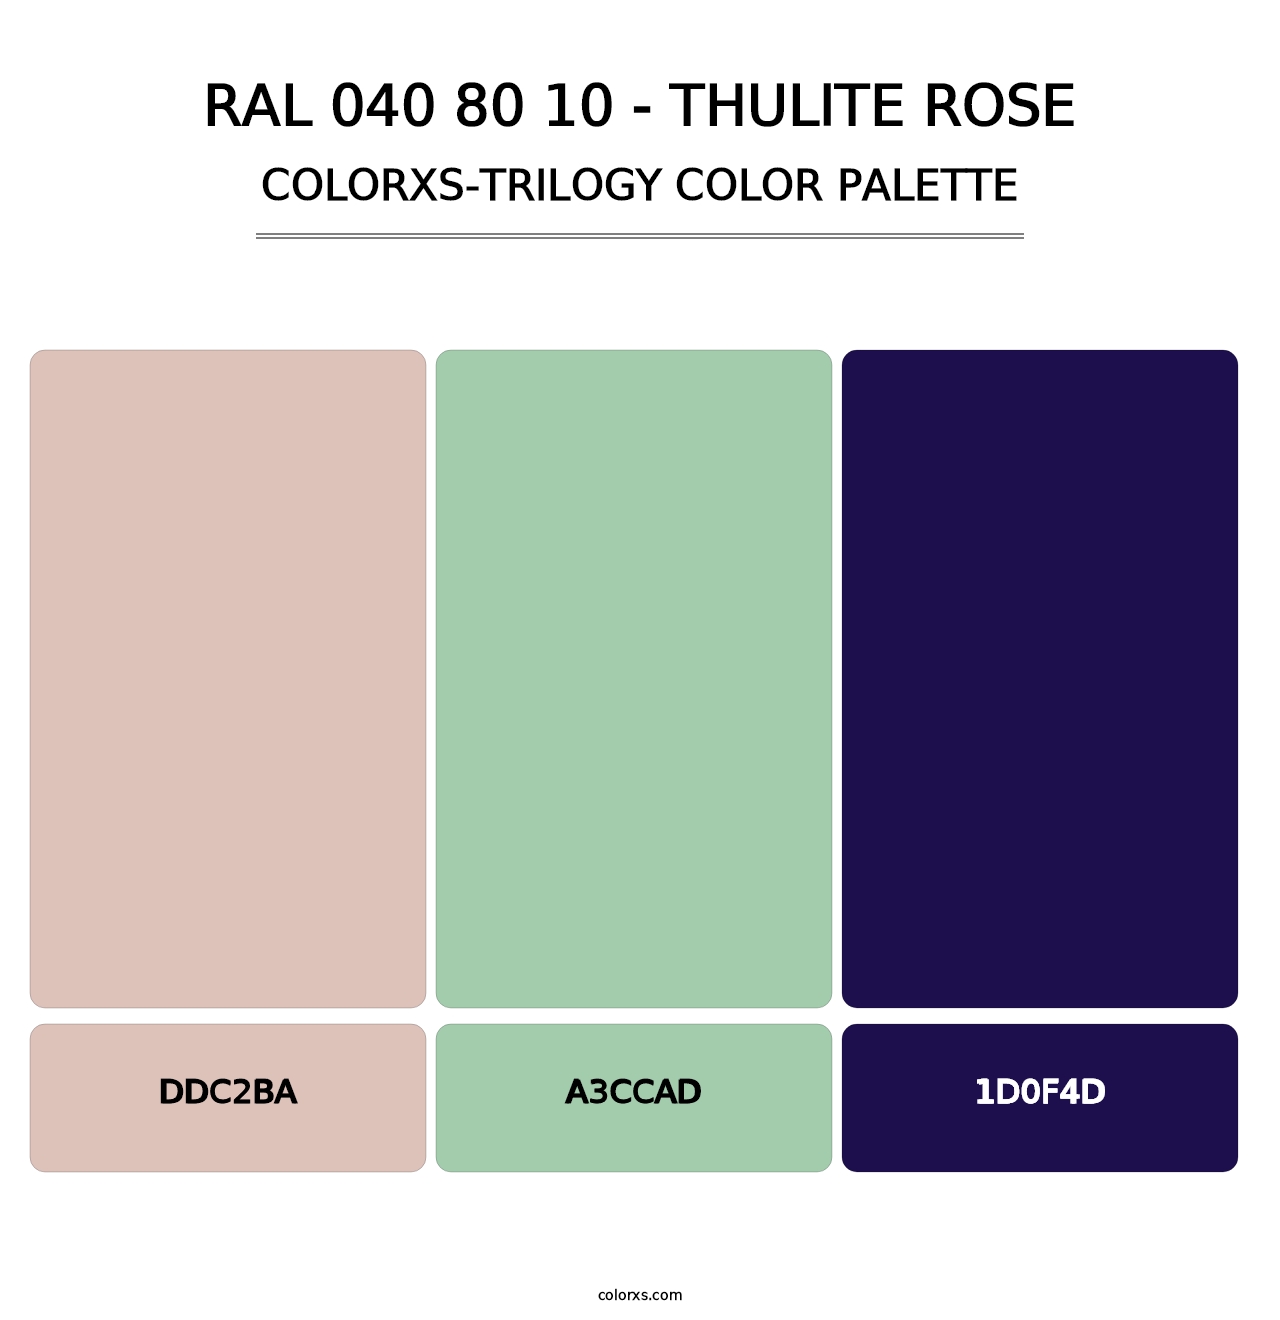 RAL 040 80 10 - Thulite Rose - Colorxs Trilogy Palette